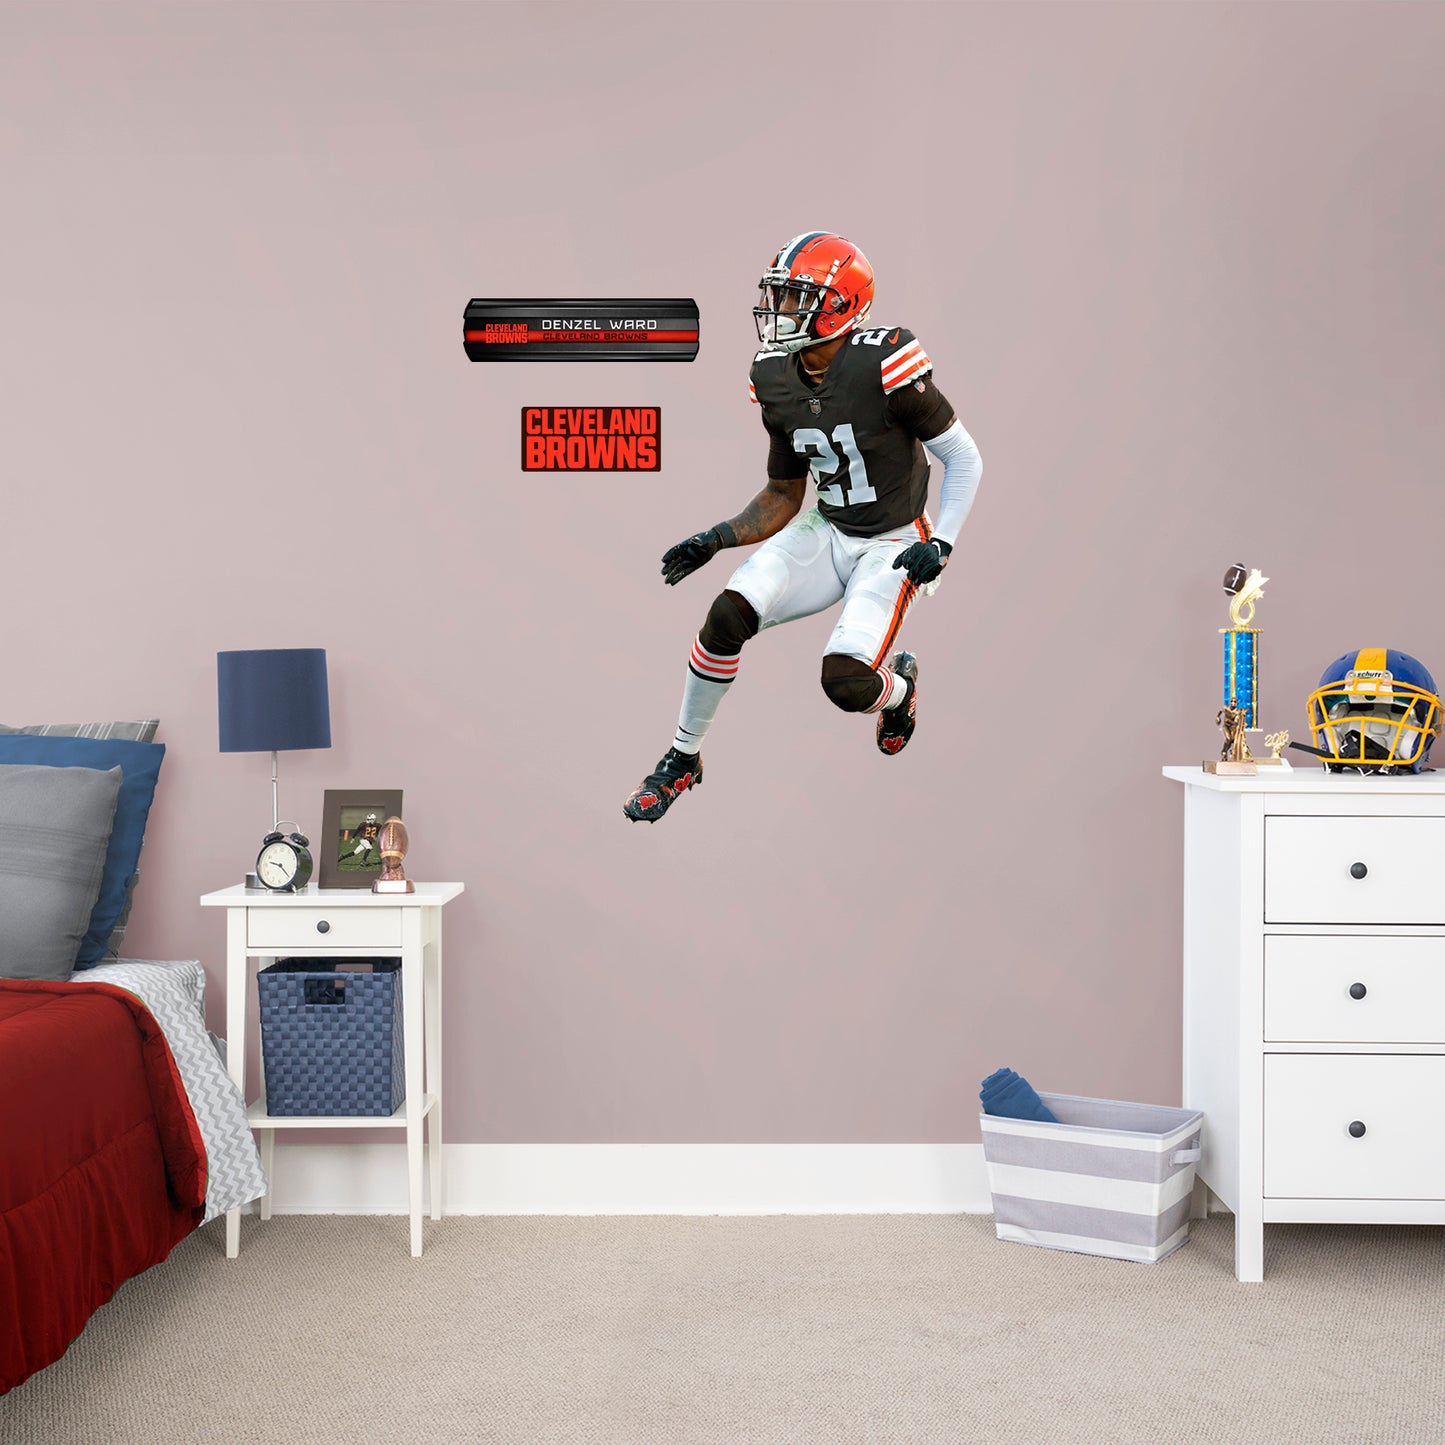 Cleveland Browns: Denzel Ward         - Officially Licensed NFL Removable     Adhesive Decal